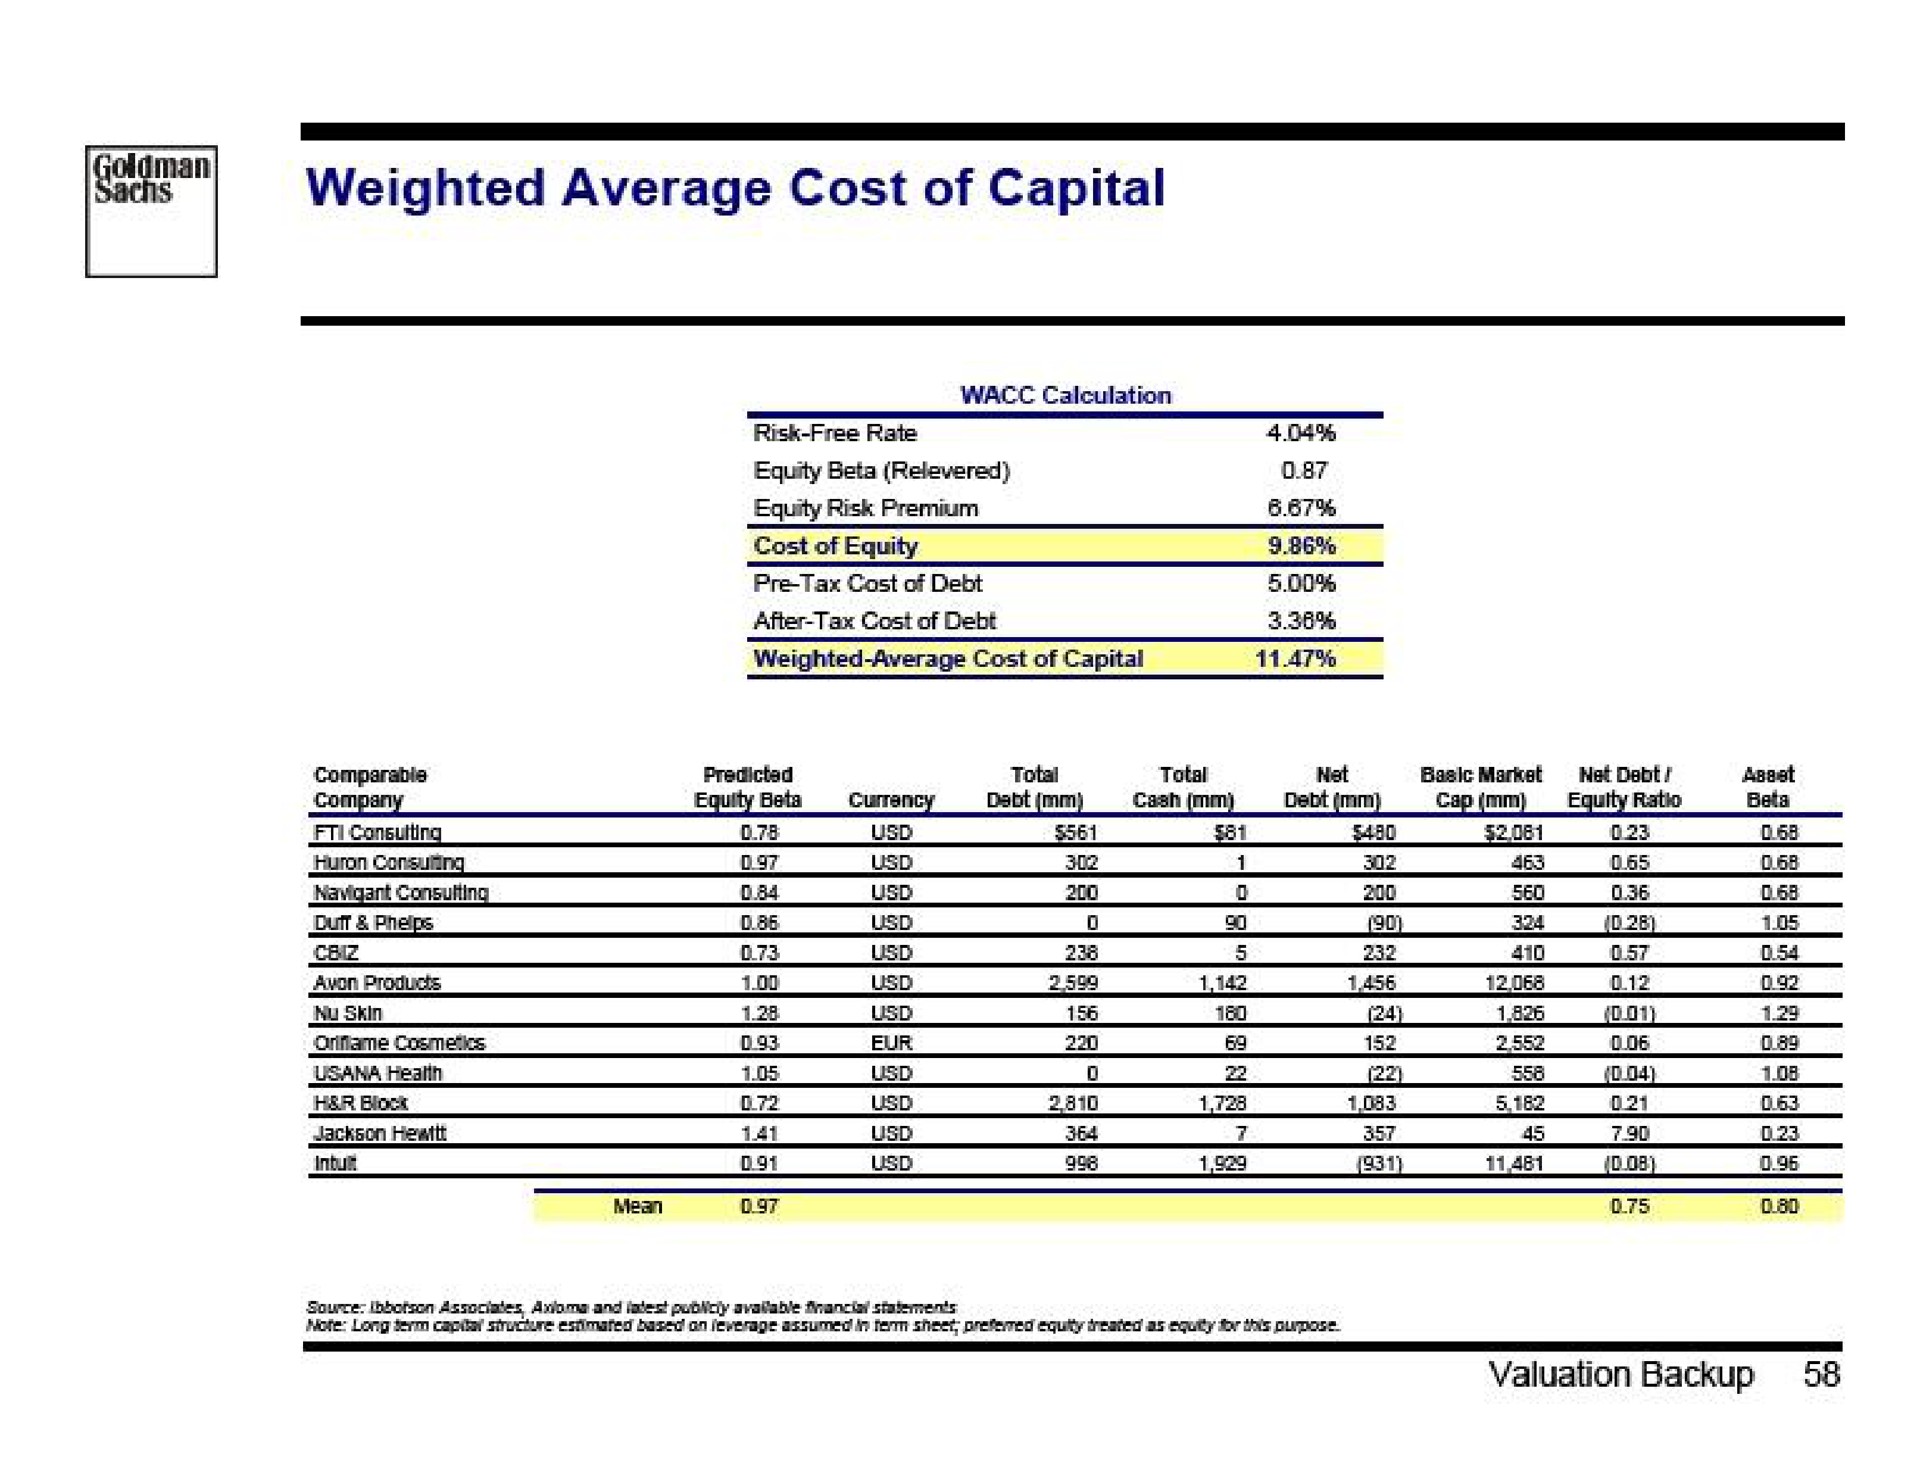 weighted average cost of capital | Goldman Sachs